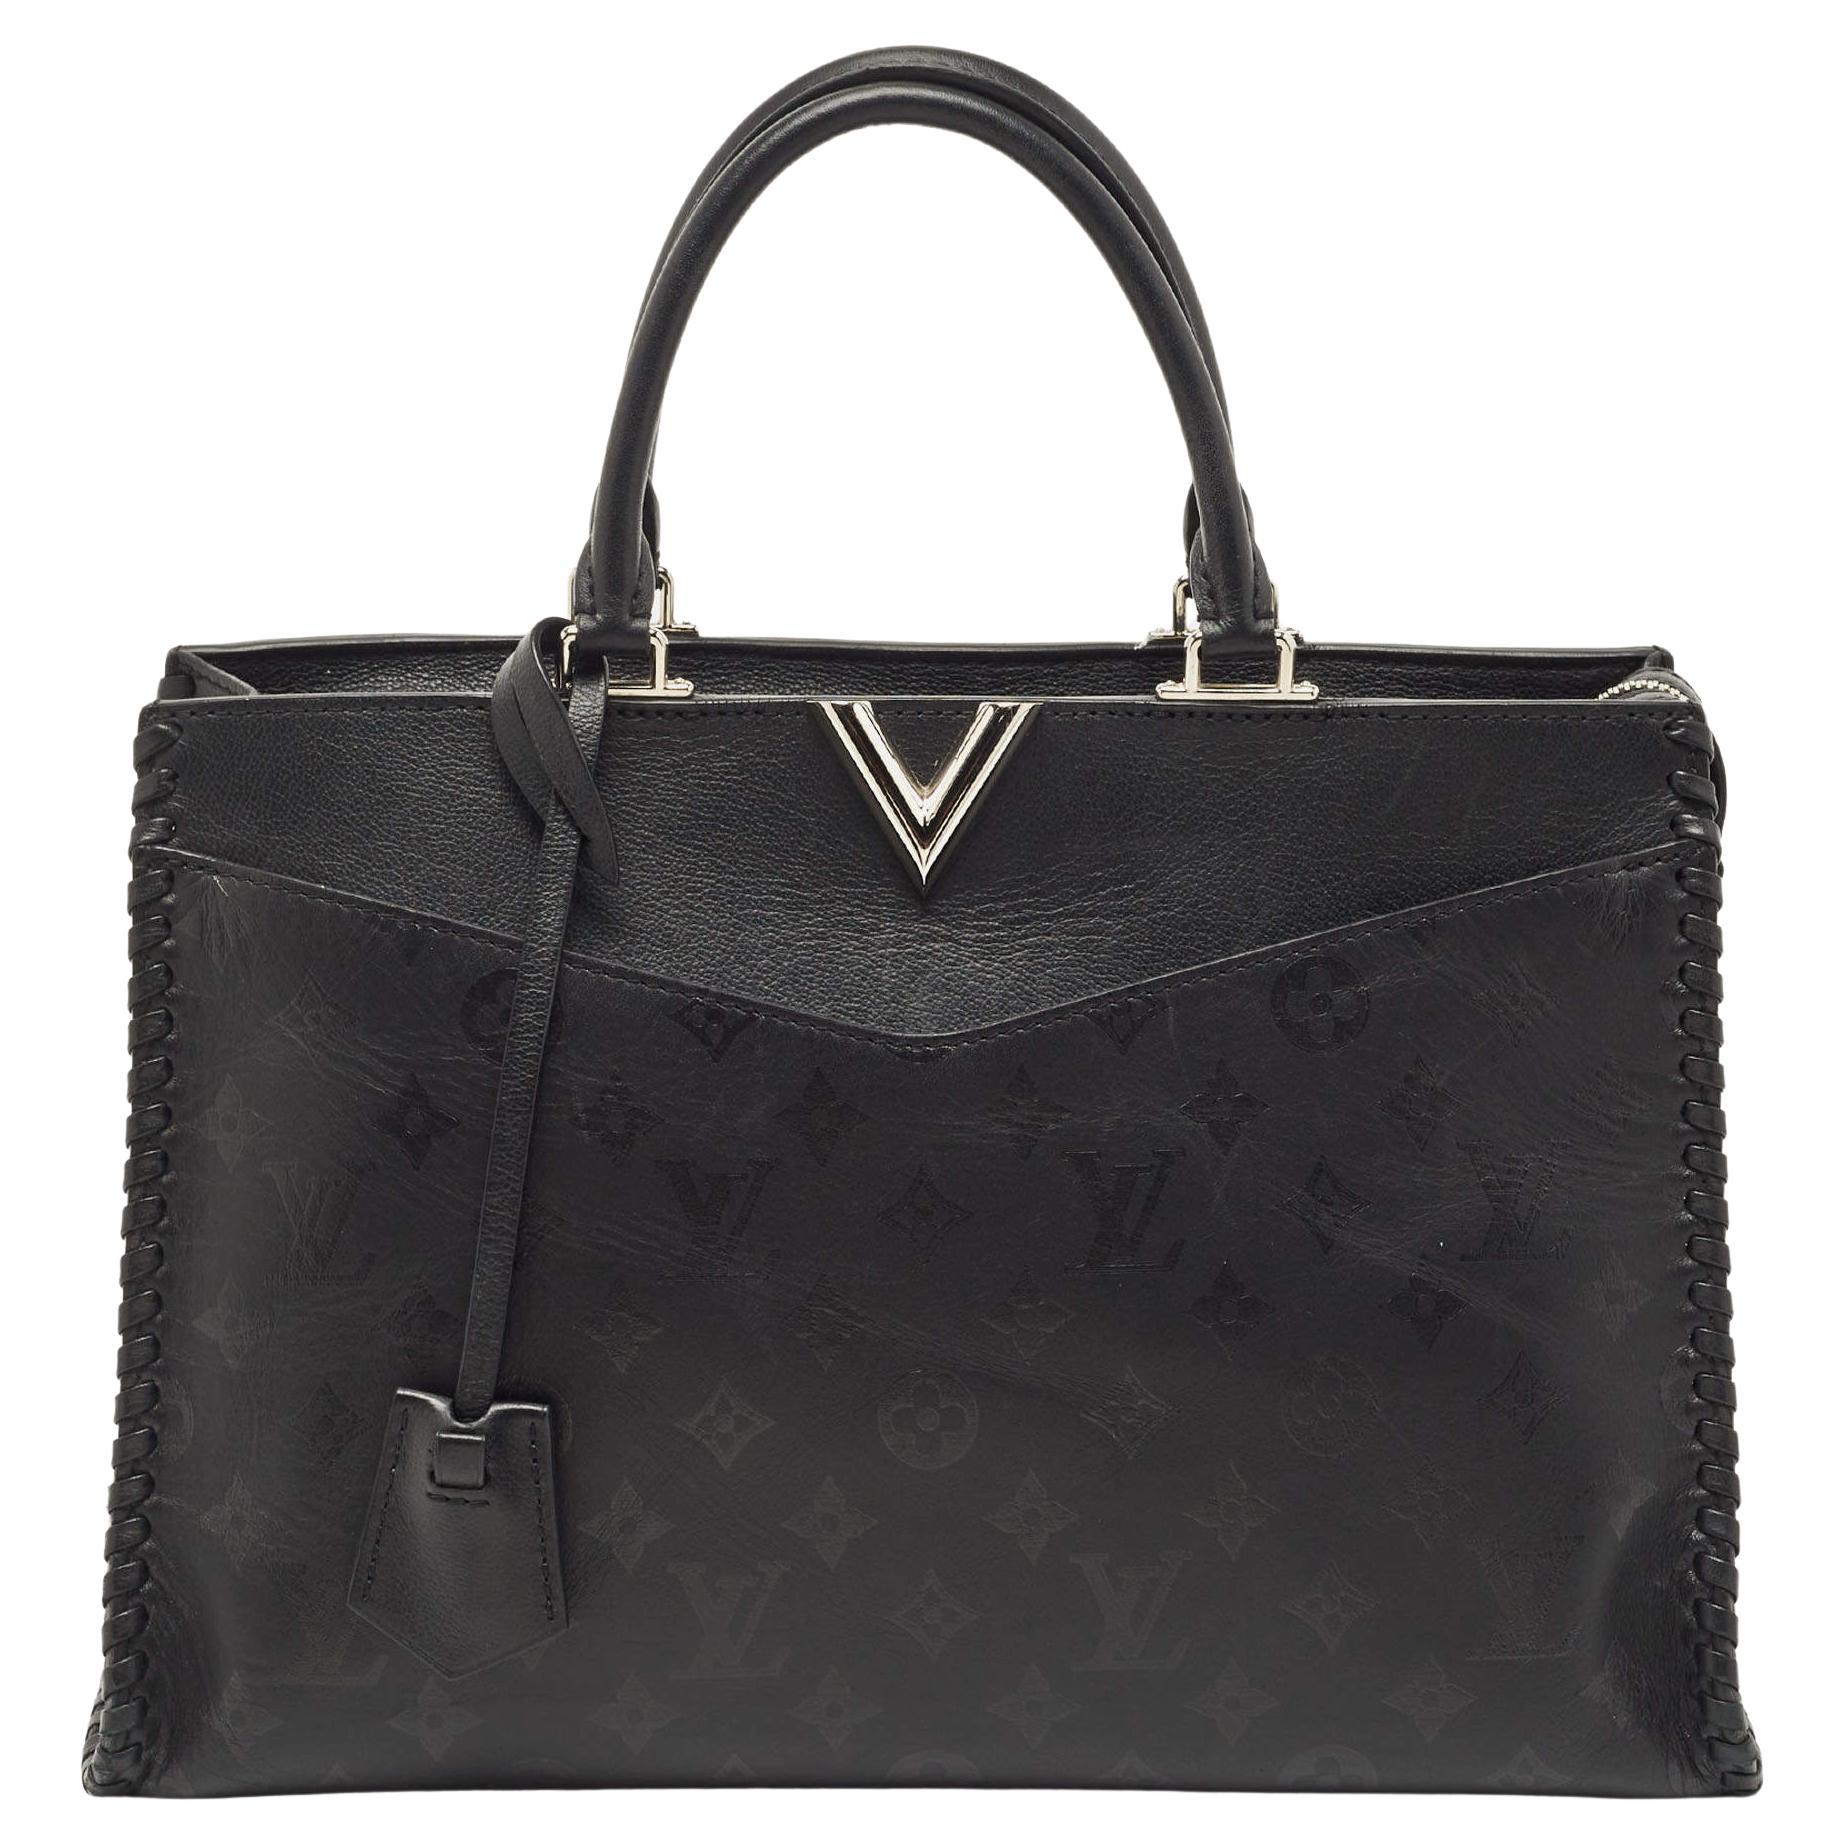 Louis Vuitton Black Monogram Cuir Plume Leather Very Zipped Tote